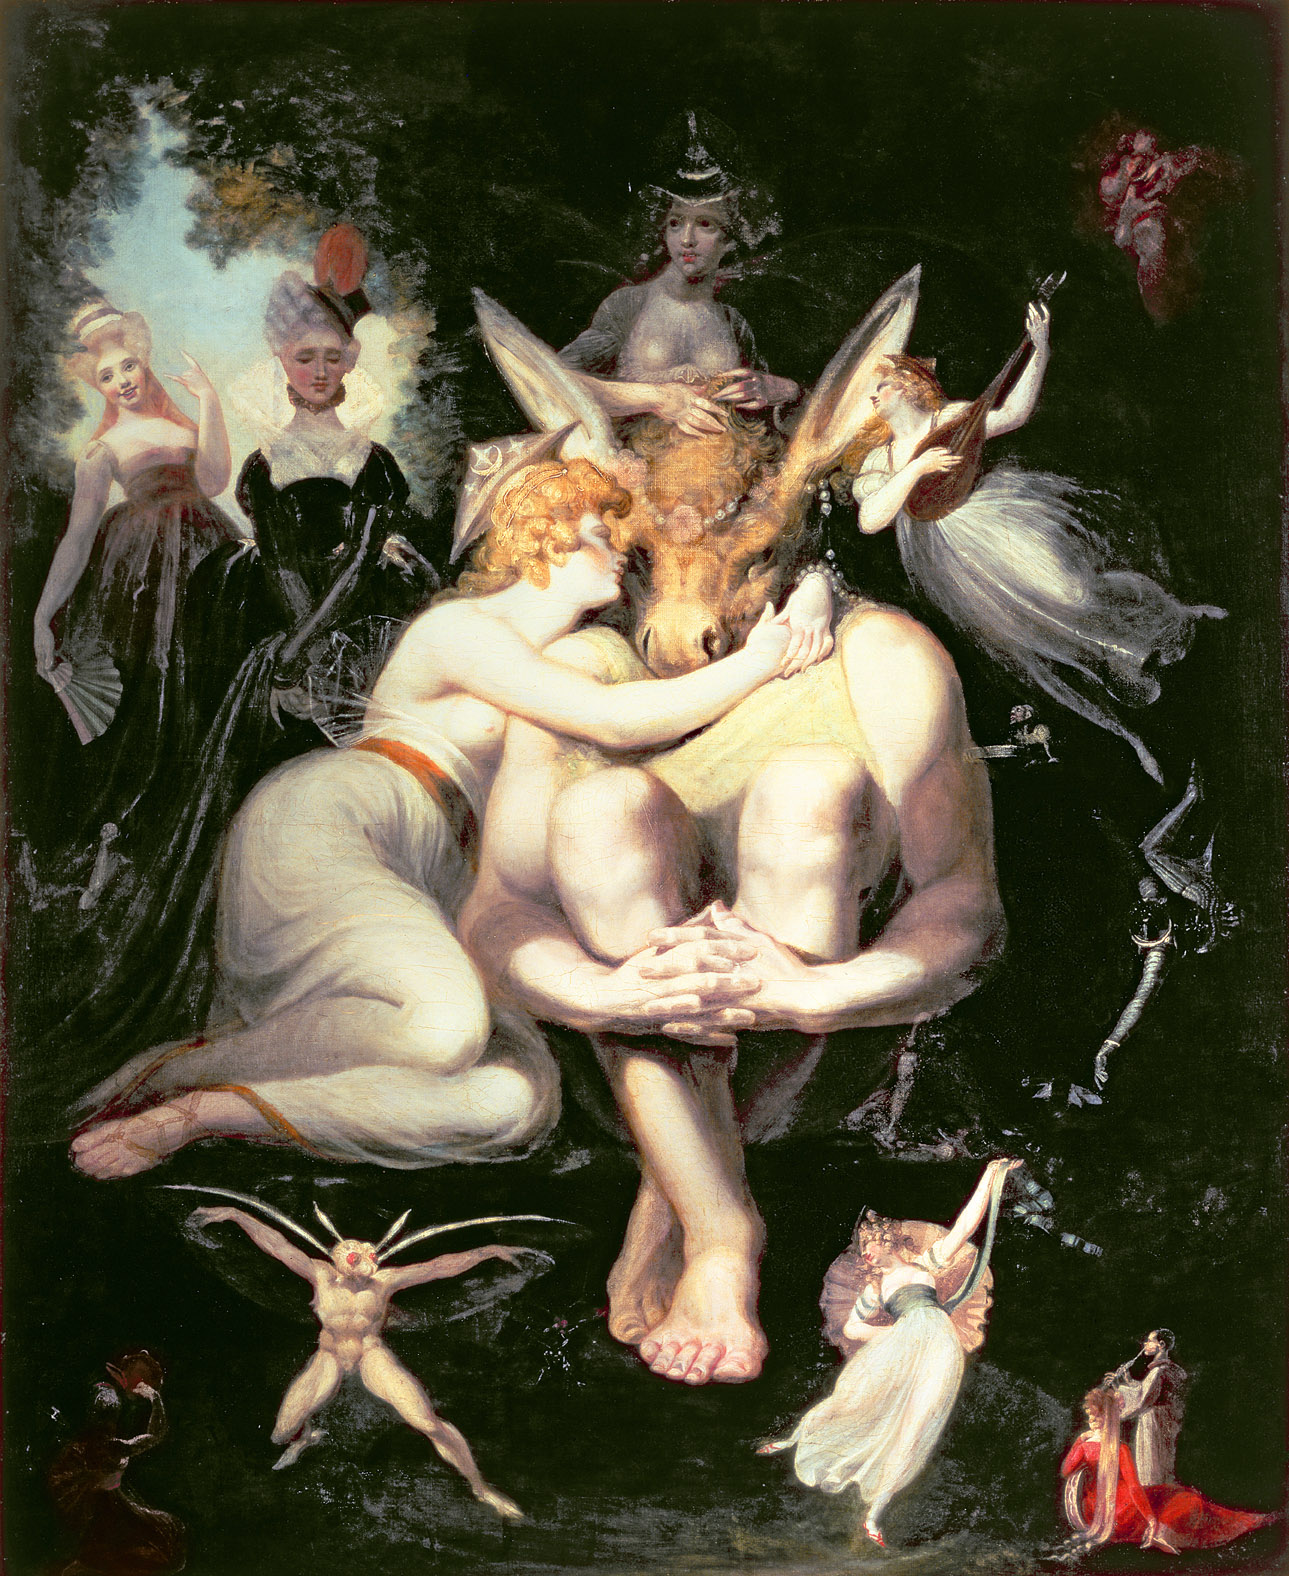 Titania Awakes, Surrounded by Attendant Fairies, by Henry Fuseli, c. 1793. 